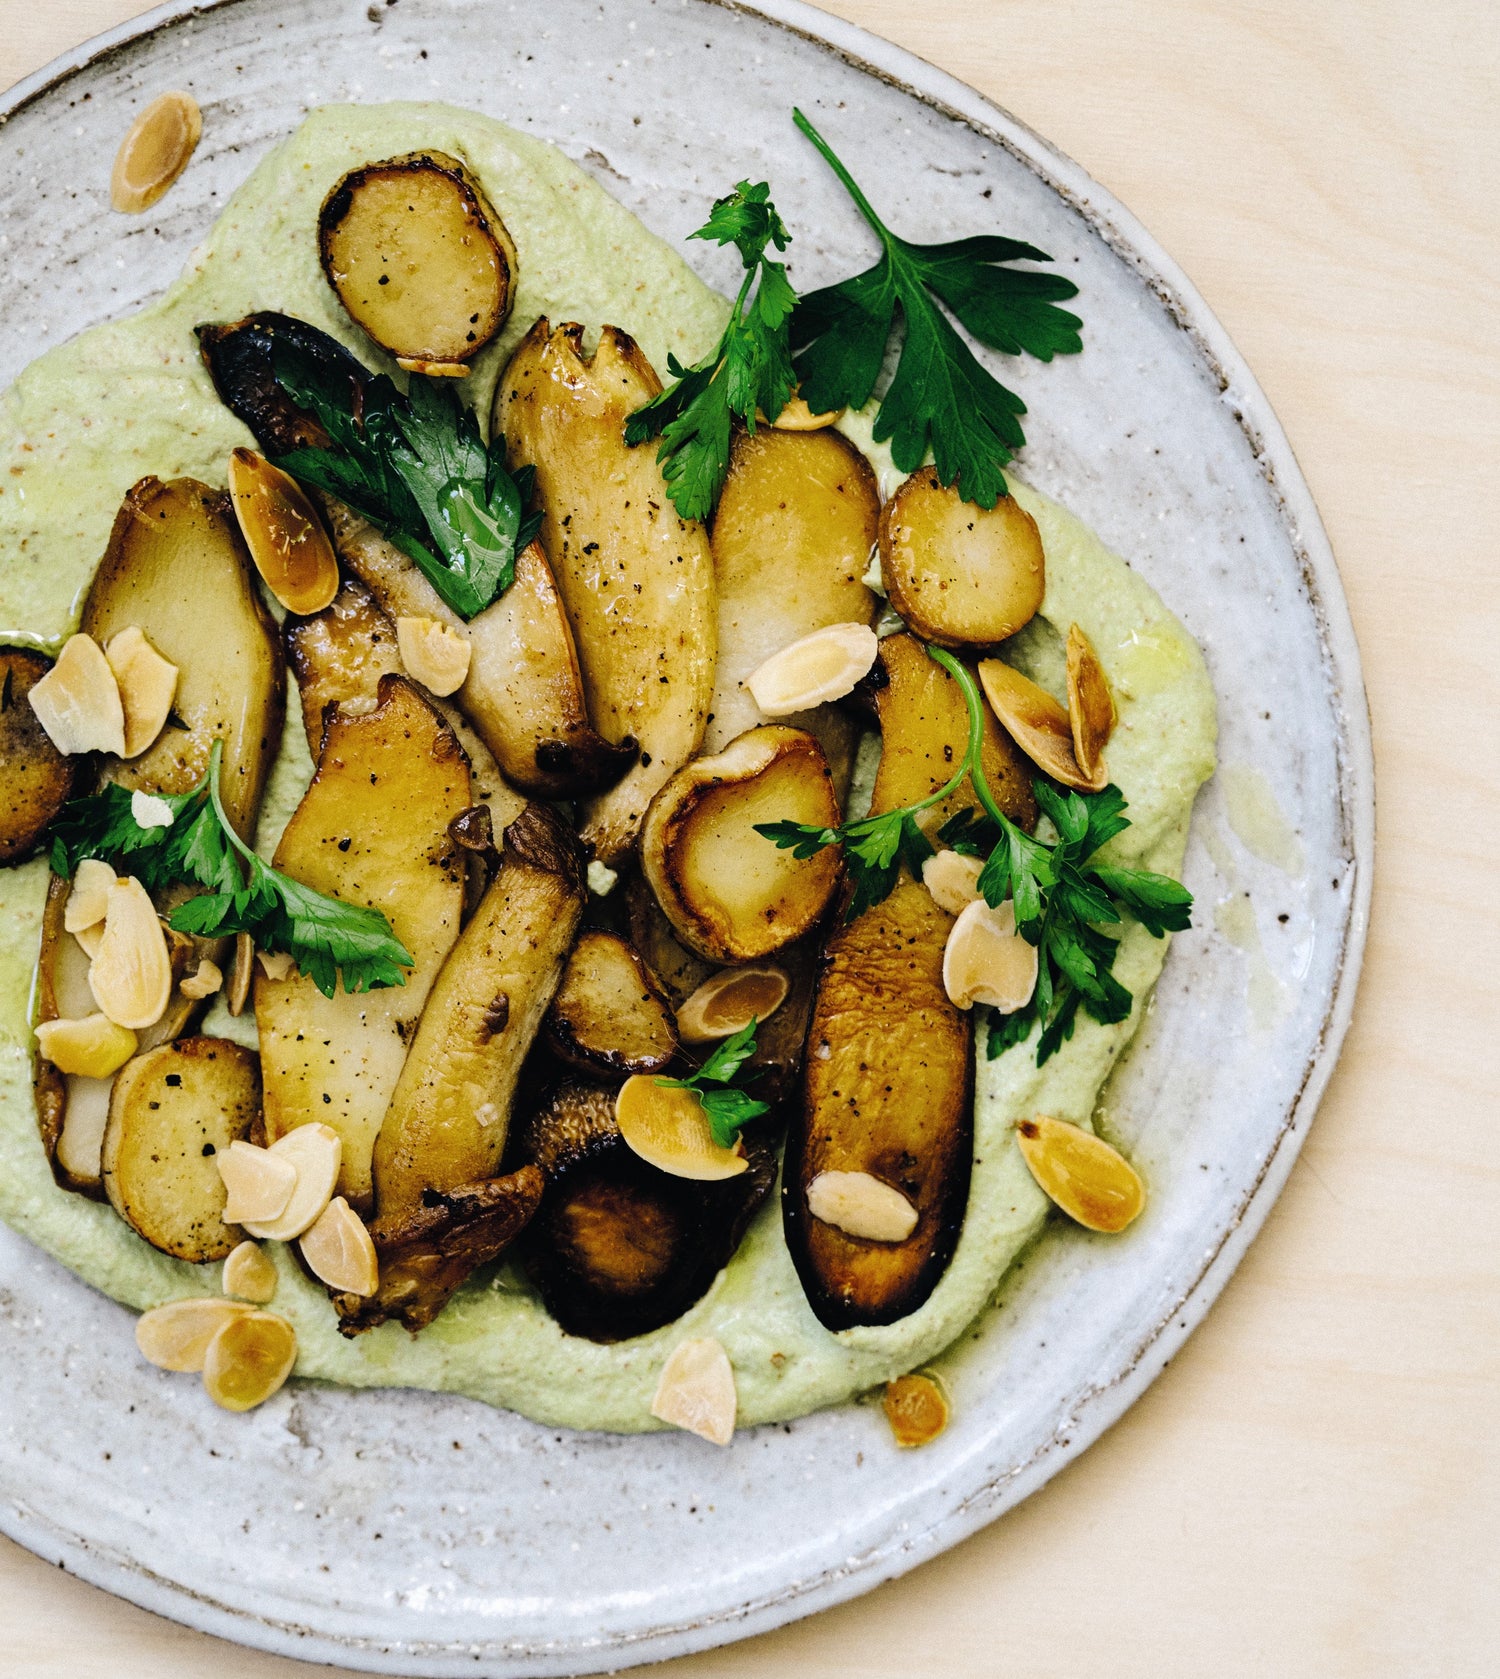 Hetty McKinnon's Pan-Seared King Oyster Mushrooms with Whipped Almonds